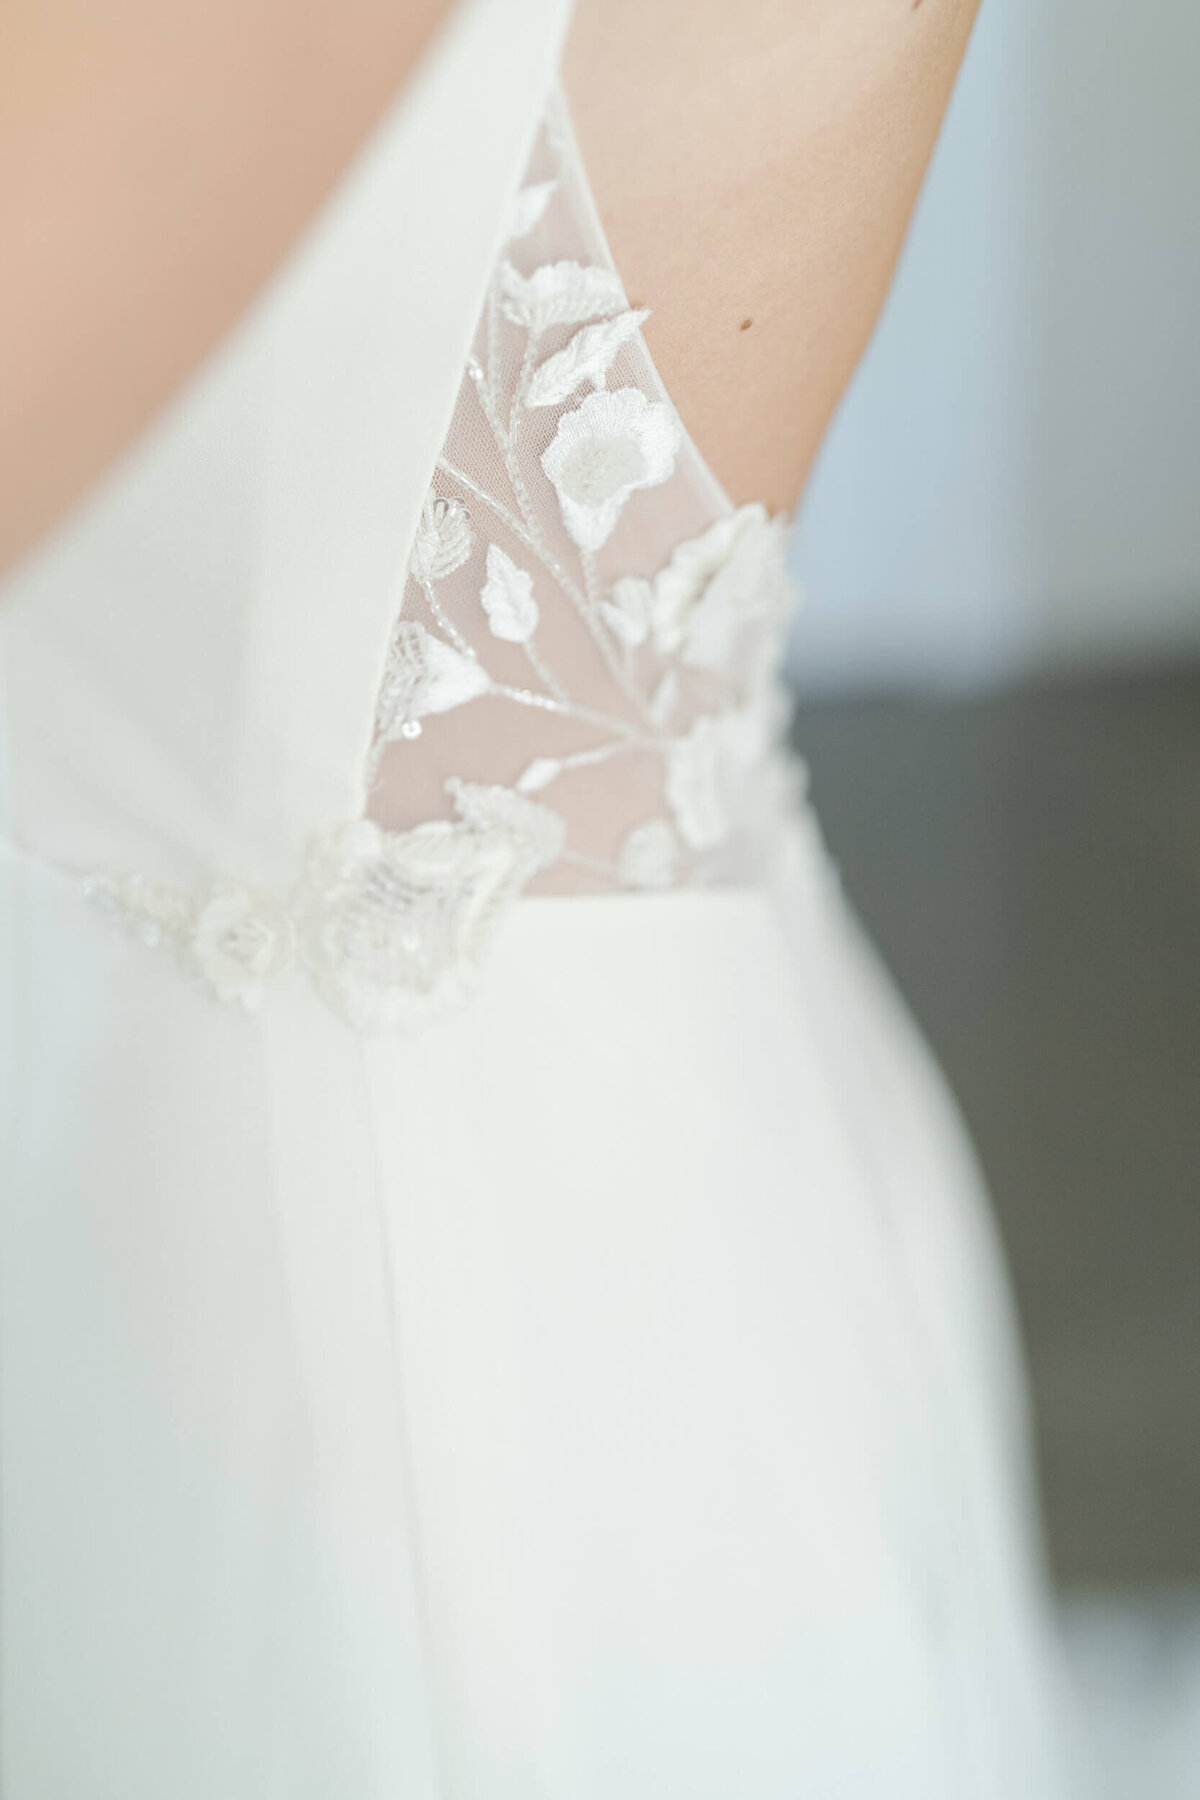 Beautiful wedding dress with petal details for the bride.